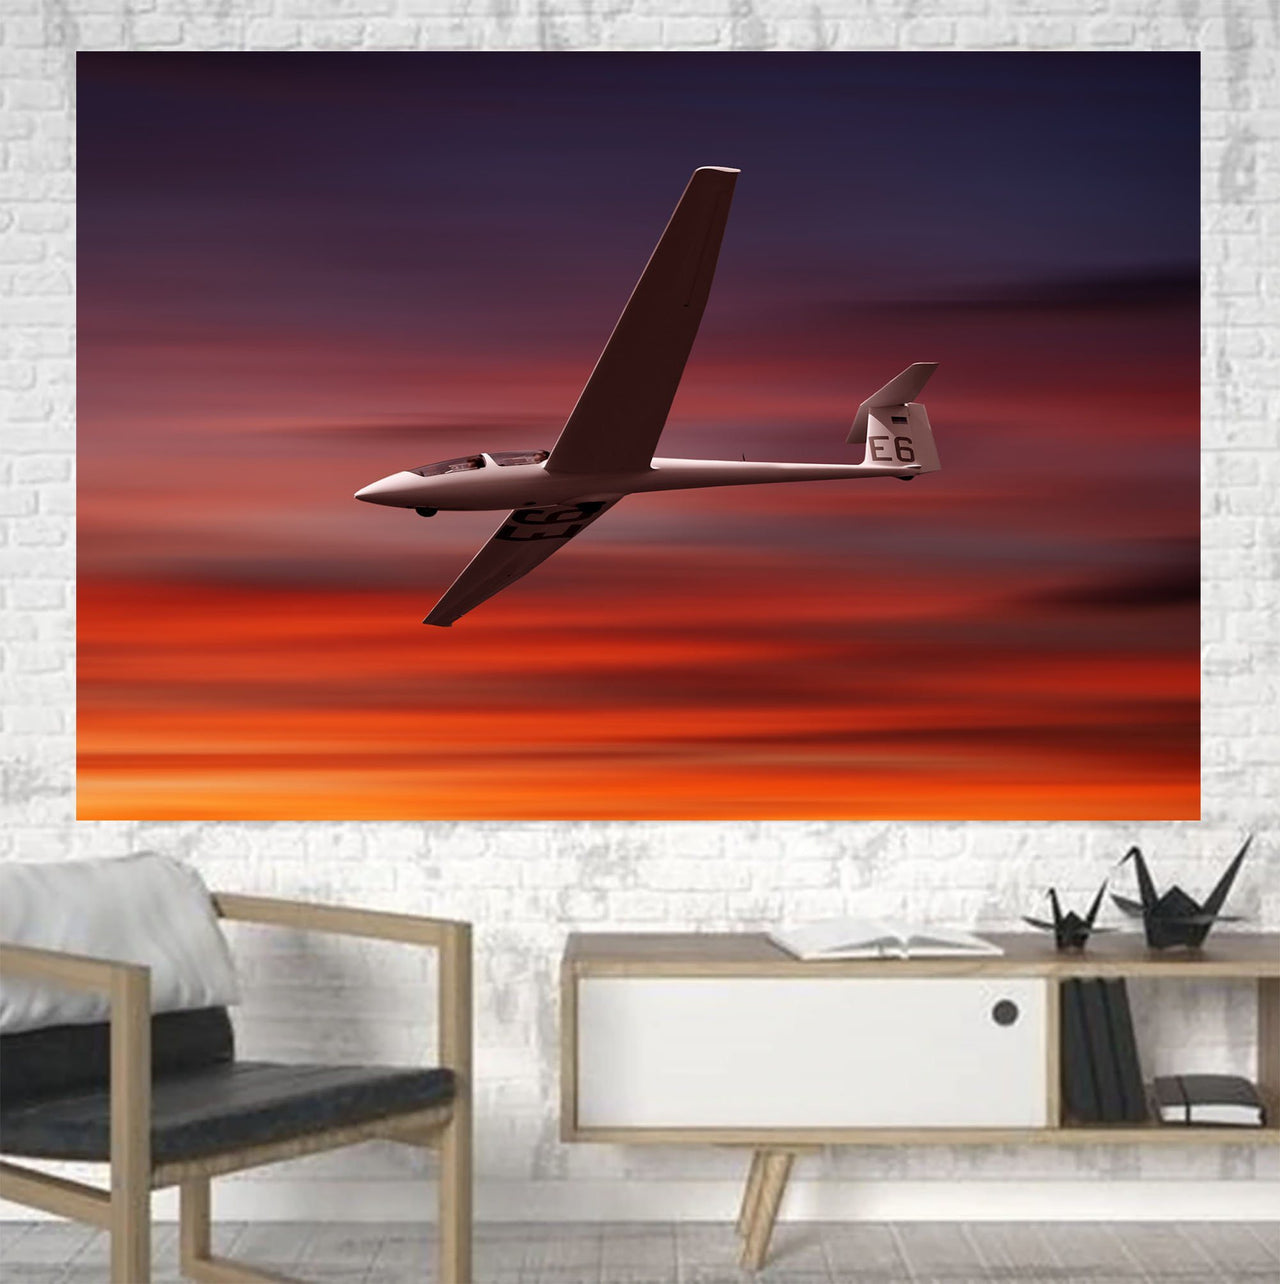 Cruising Glider at Sunset Printed Canvas Posters (1 Piece) Aviation Shop 